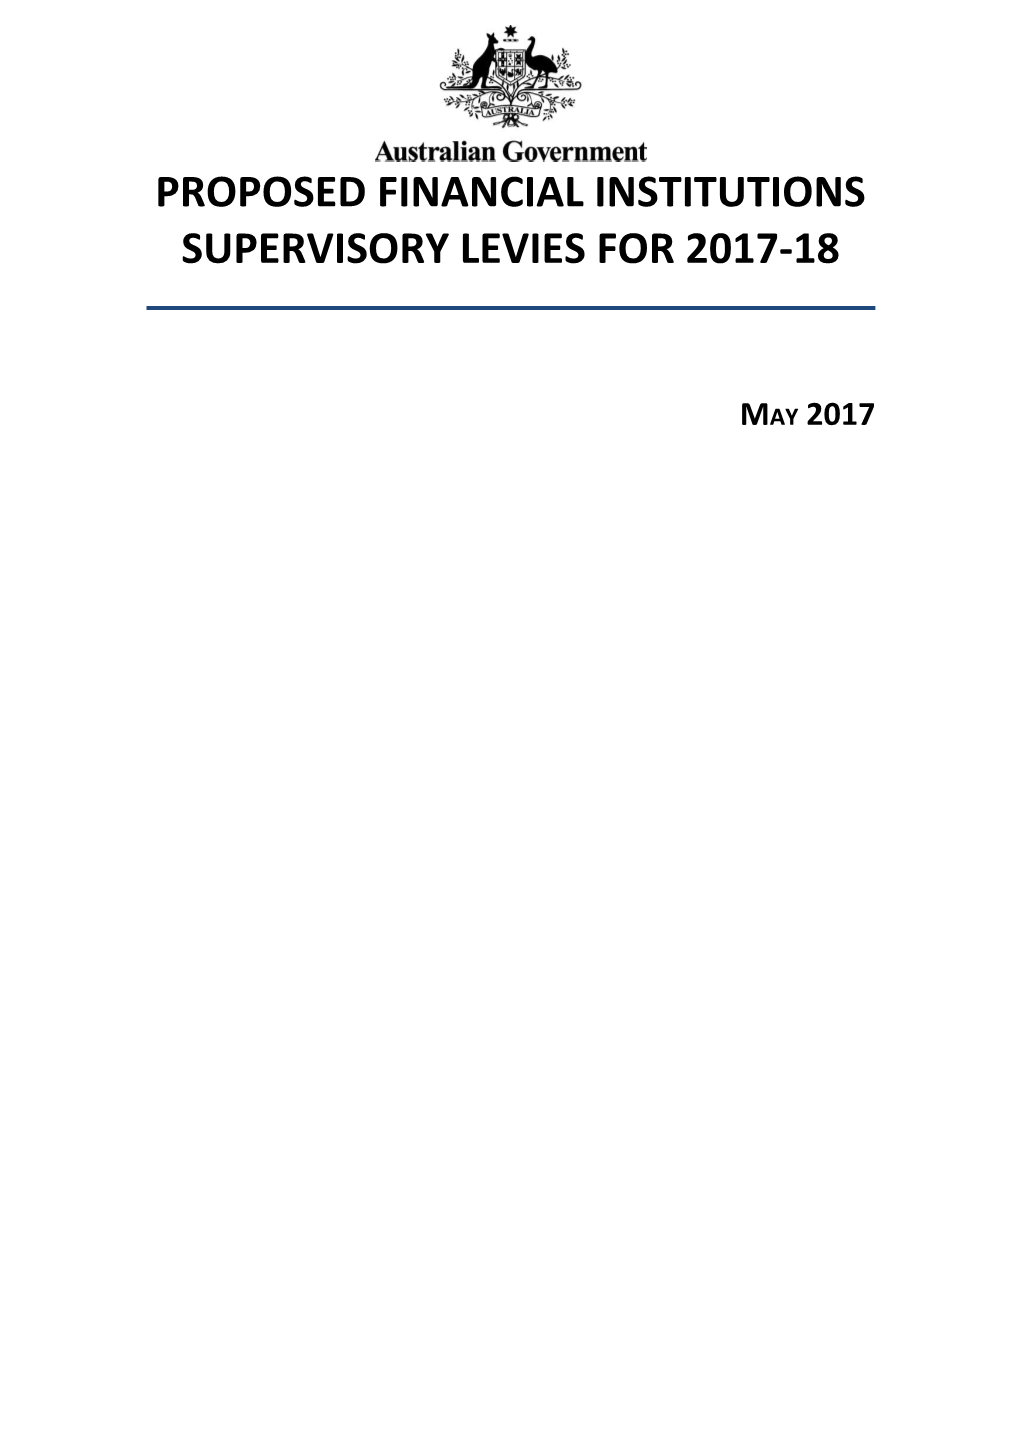 Proposed Financial Institutions Supervisory Levies for 2017-18